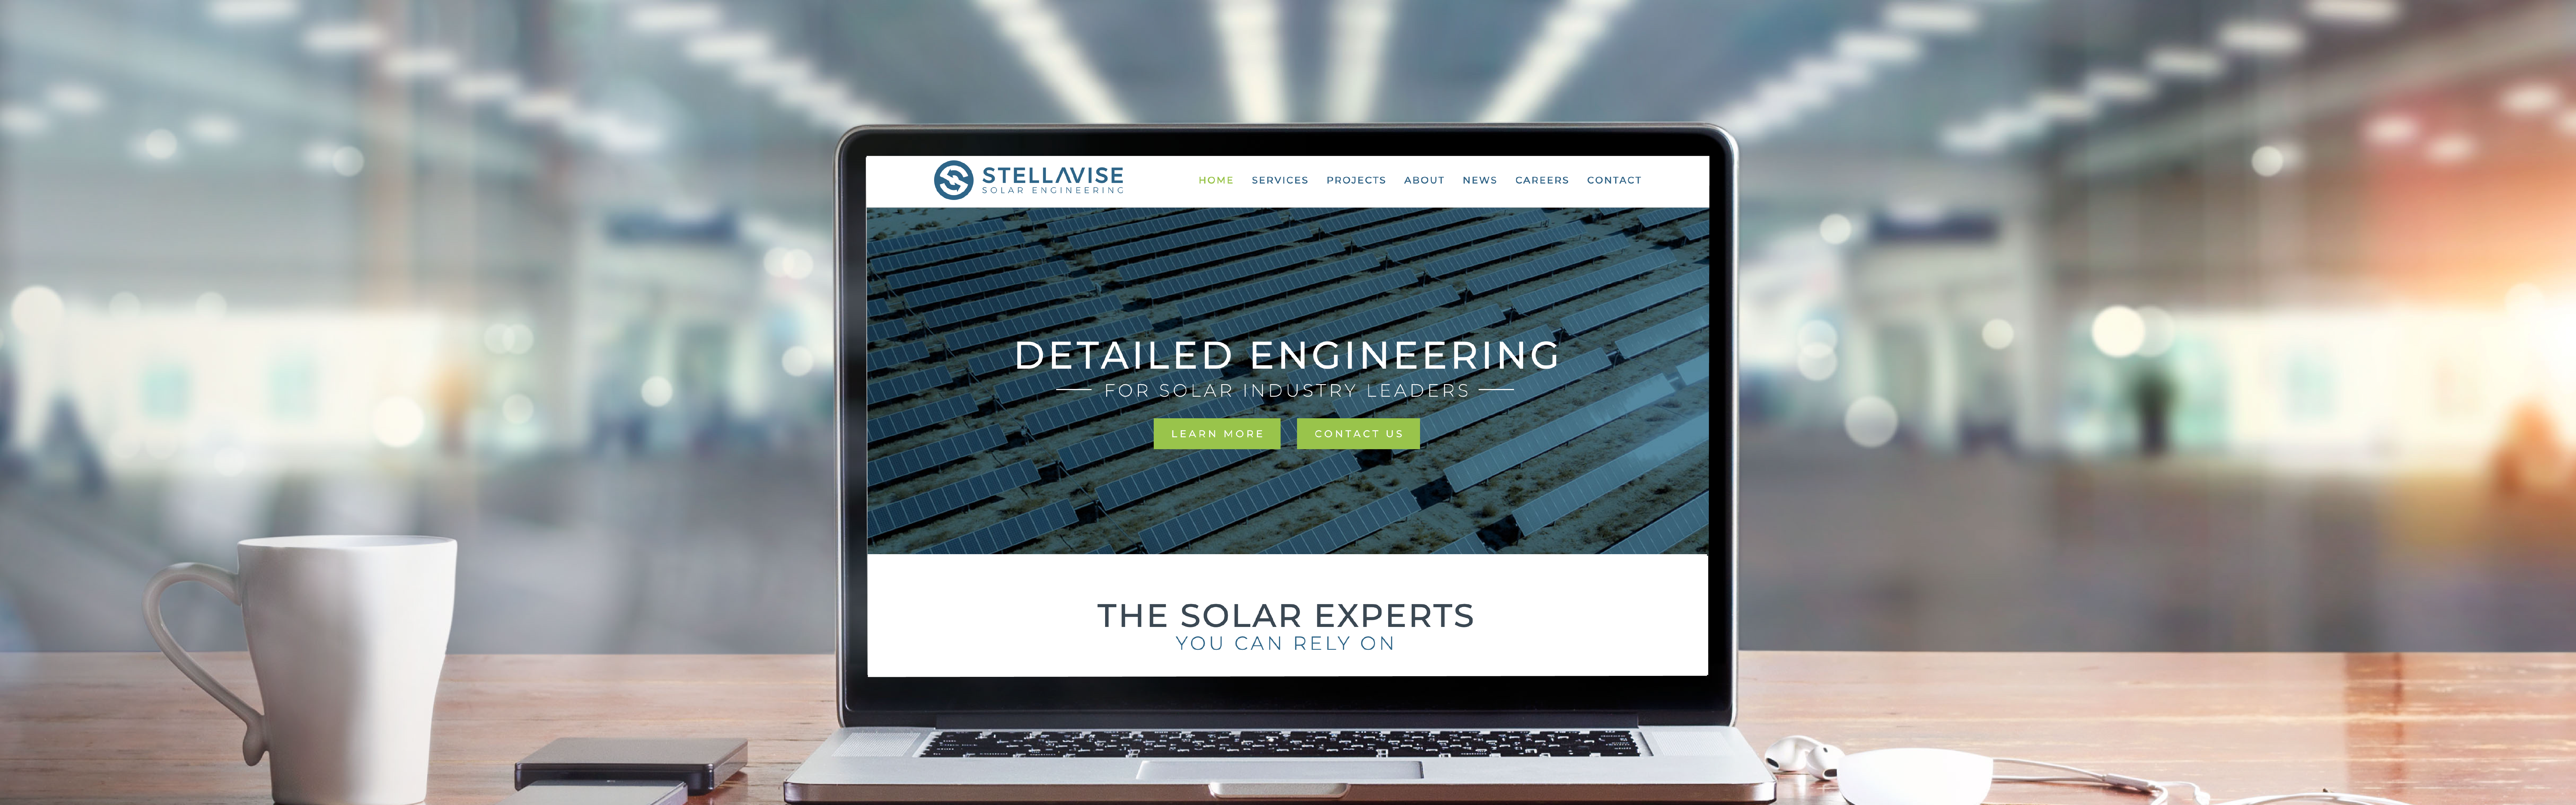 A laptop is open on a desk displaying a website for a company named "Stellavise" which specializes in detailed engineering for solar energy solutions, with a tagline "the solar expert.